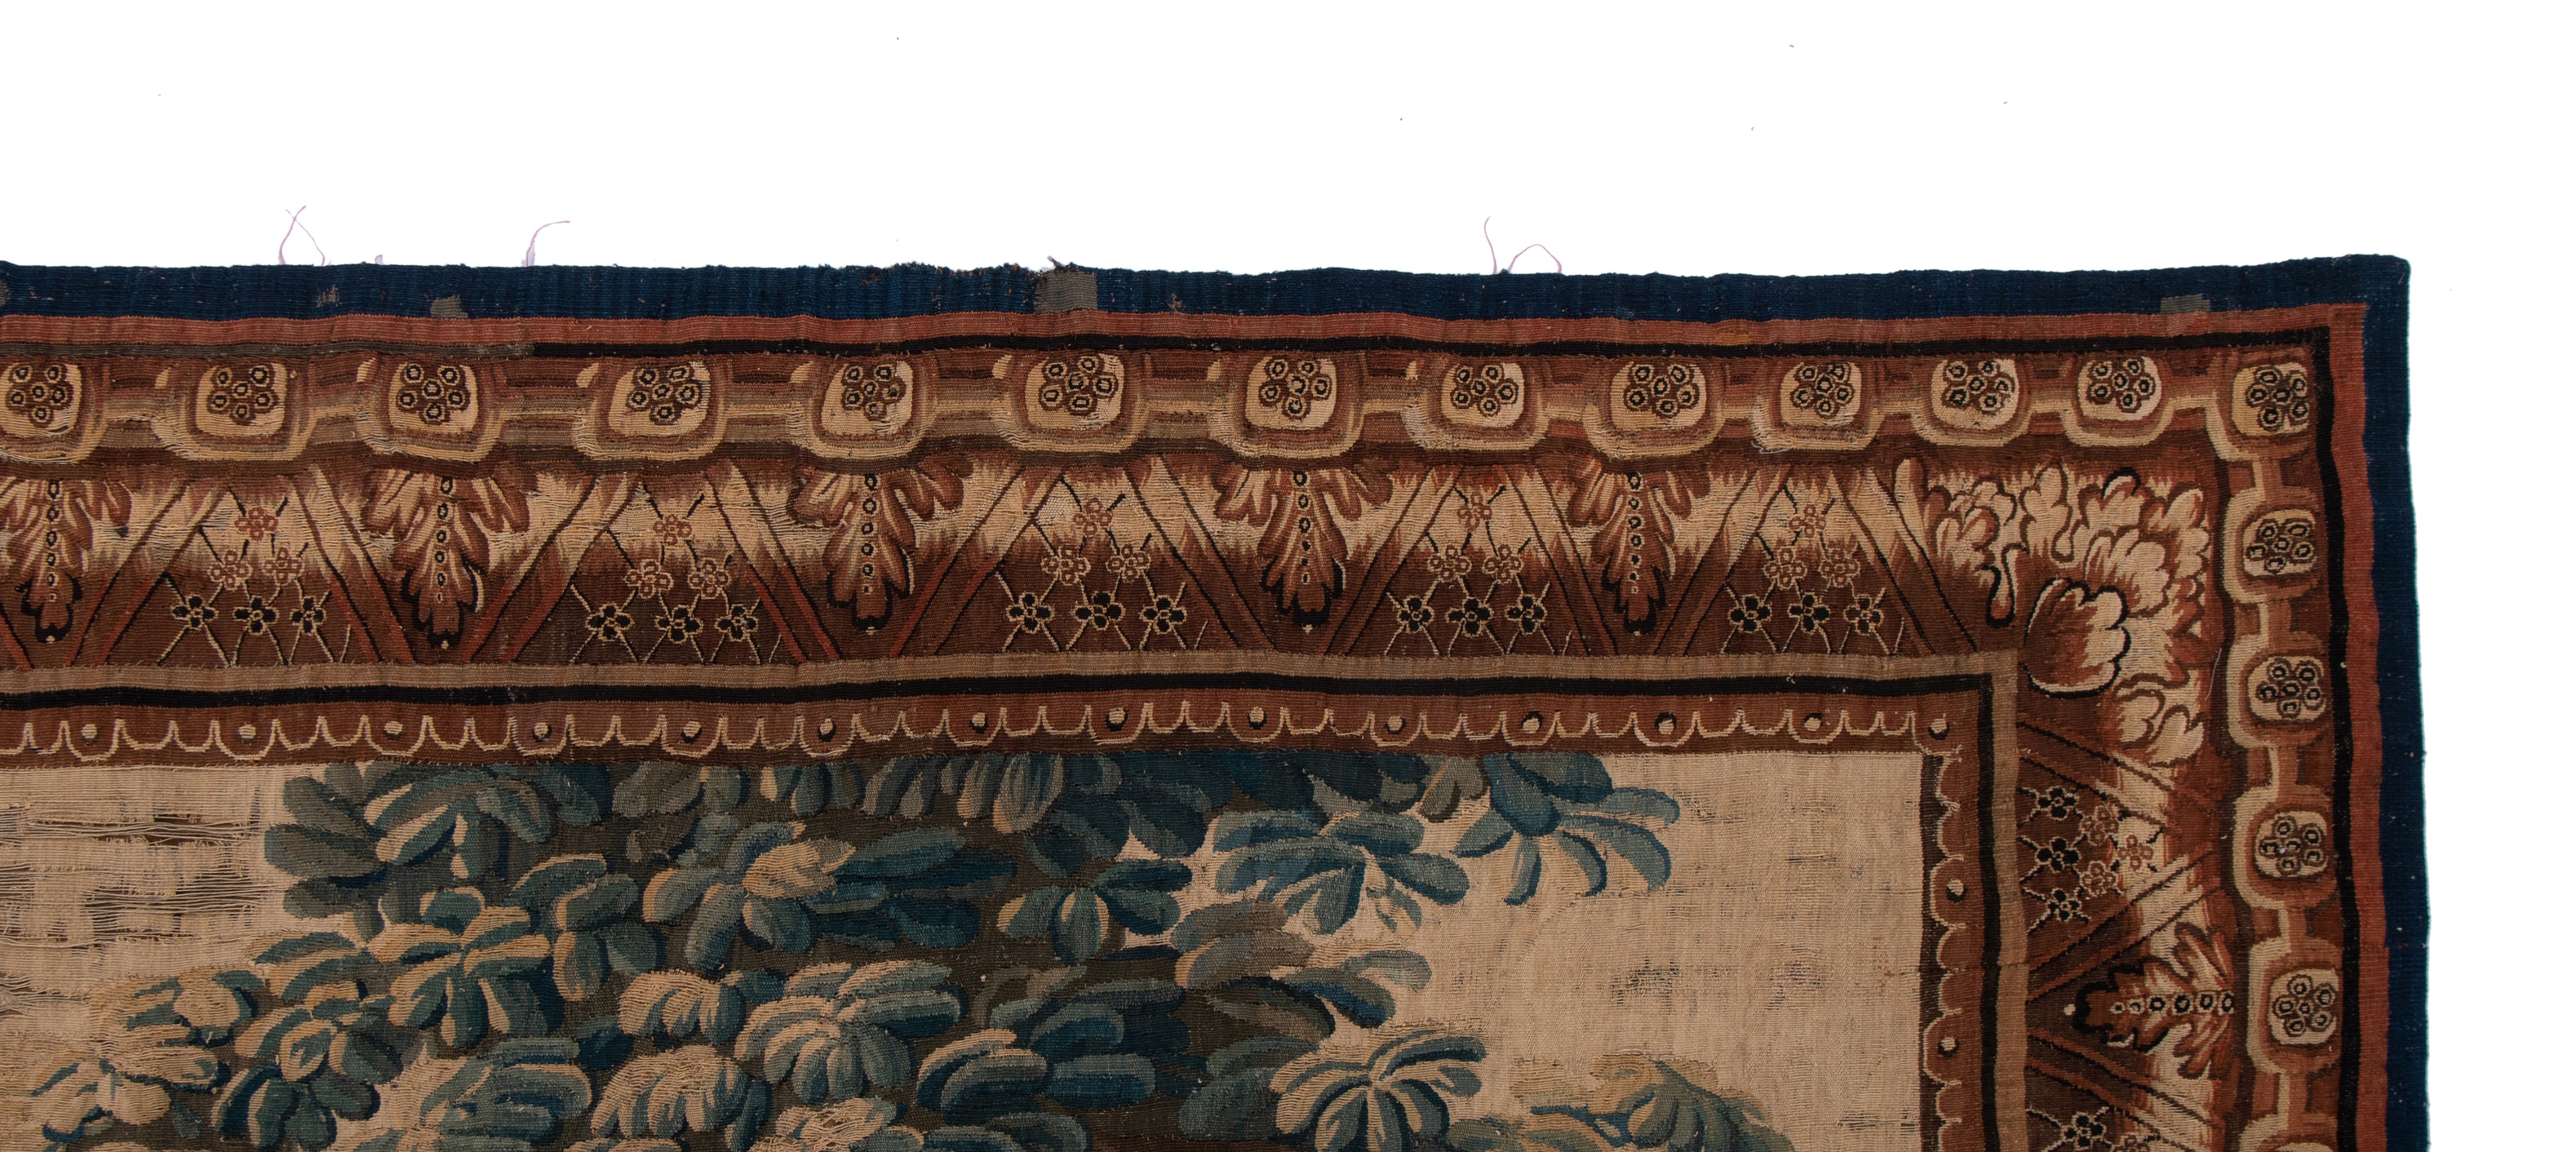 An Aubusson verdure wall tapestry, marked 'Aubusson F. Grellet', 18thC, H 285 x W 168 cm - Image 5 of 8